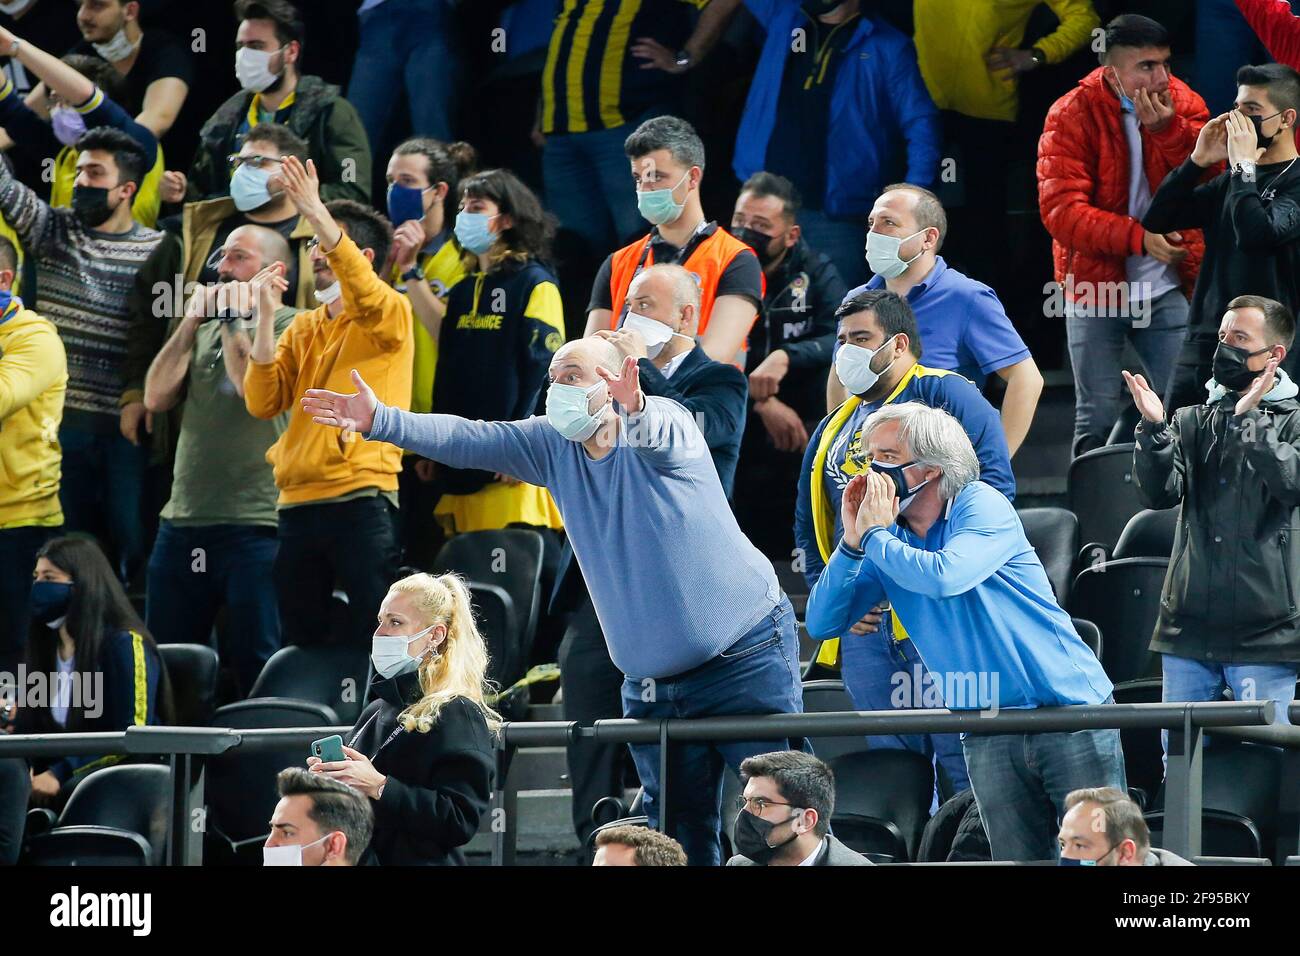 ISTANBUL, Turkey. 16th Apr, 2021: Istanbul, Turkey. 16th Apr, 2021. ISTANBUL, TURKEY - APRIL 16: Supporters of Fenerbahce Oznur Kablo during the Euroleague Women Final Four match between Fenerbahce Oznur Kablo and UMMC Ekaterinburg at Volkswagen Arena on April 16, 2021 in Istanbul, Turkey (Photo by /Orange Pictures) Credit: Orange Pics BV/Alamy Live News Stock Photo